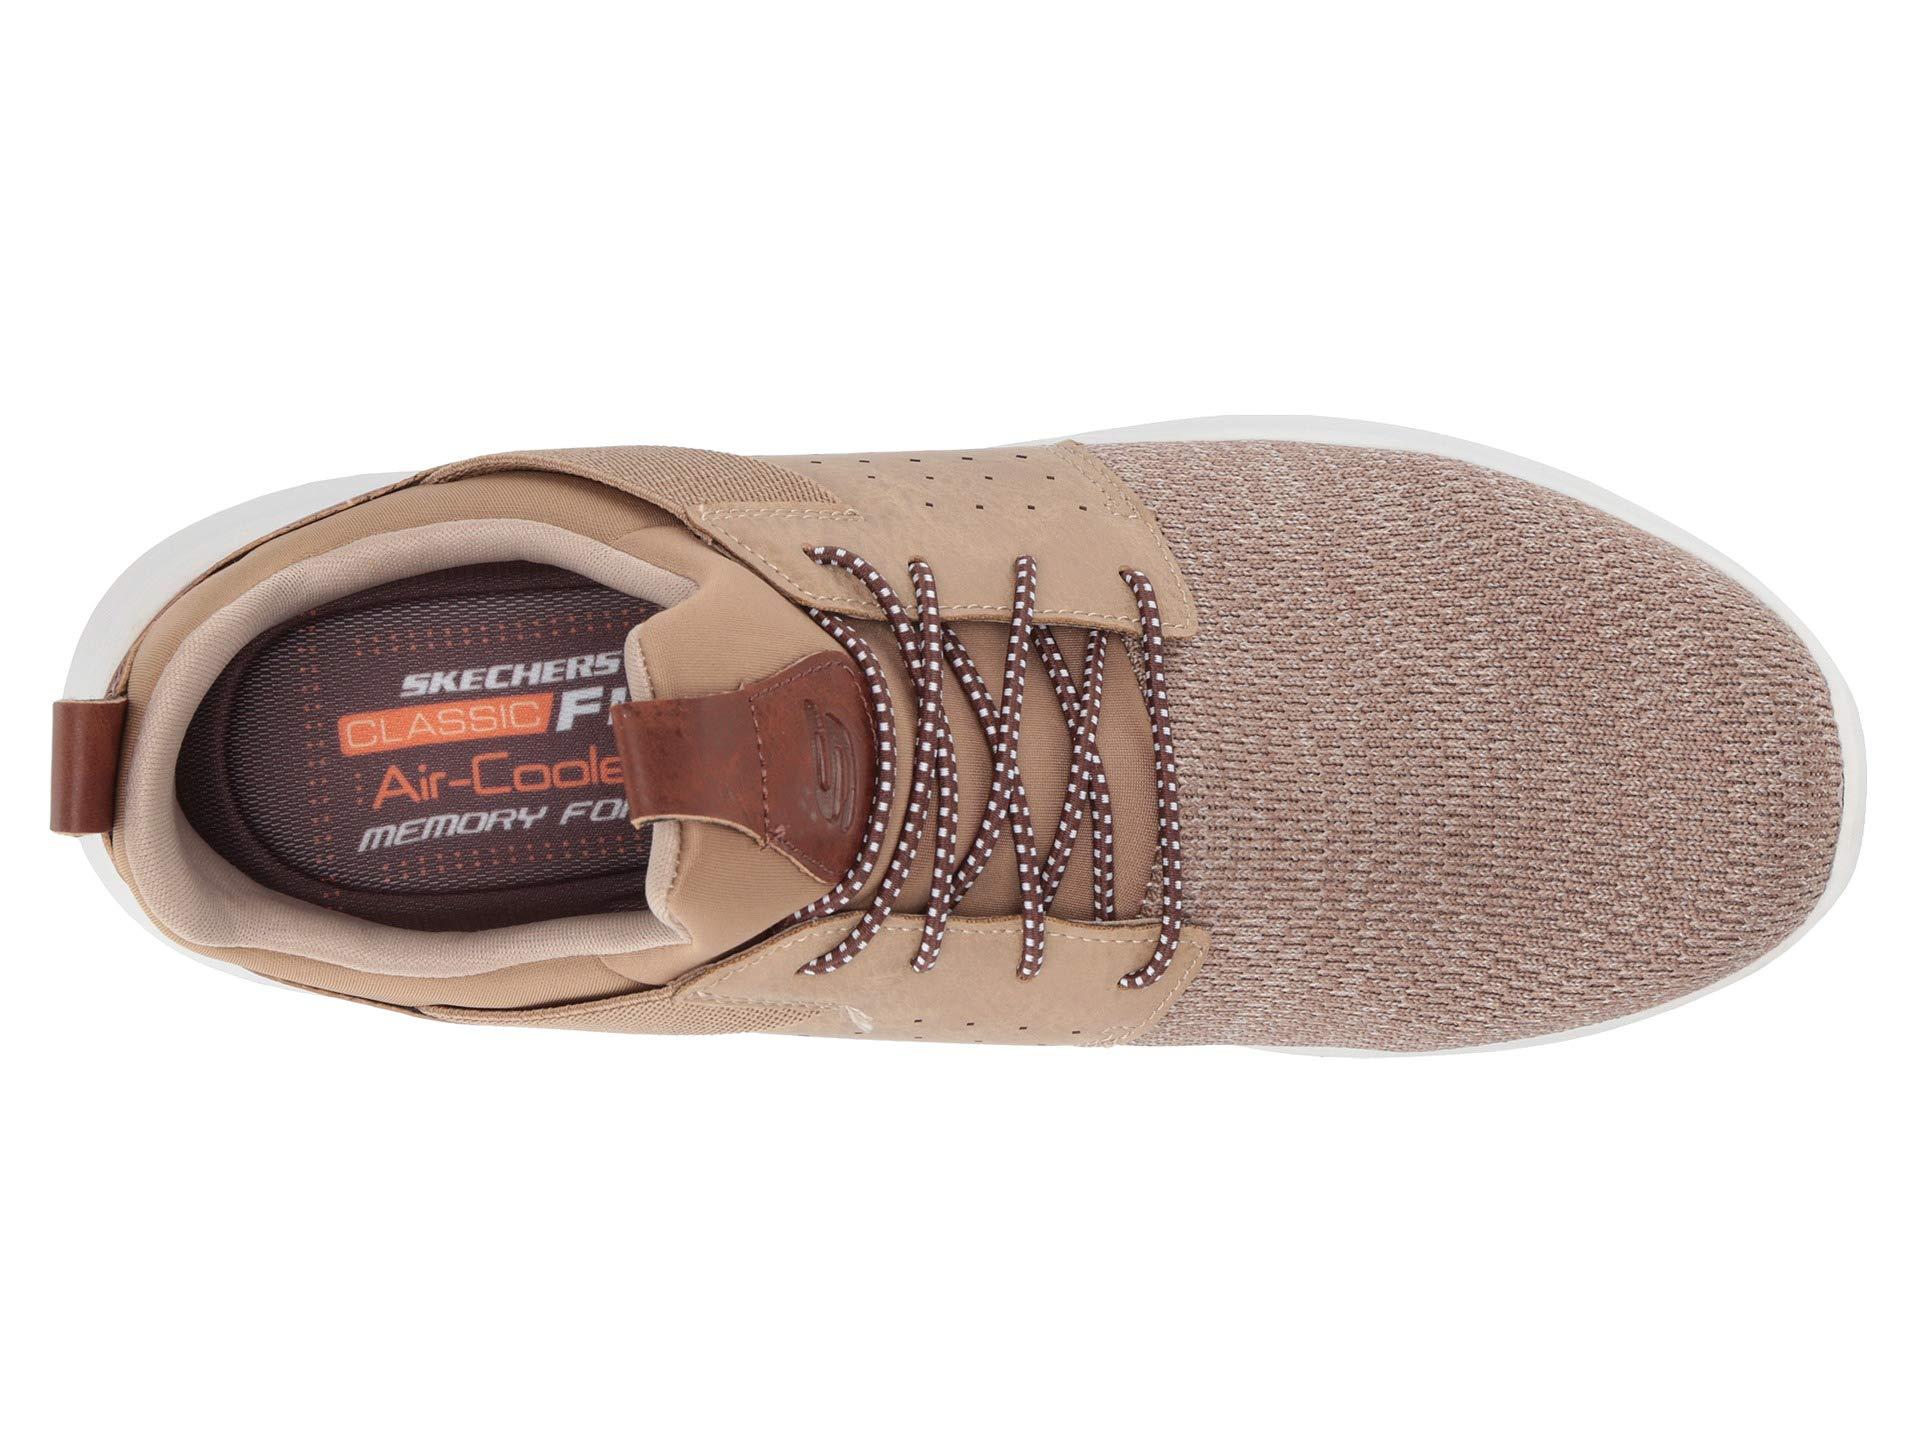 Skechers Classic Fit Delson Camben in Tan (Brown) for Men - Lyst